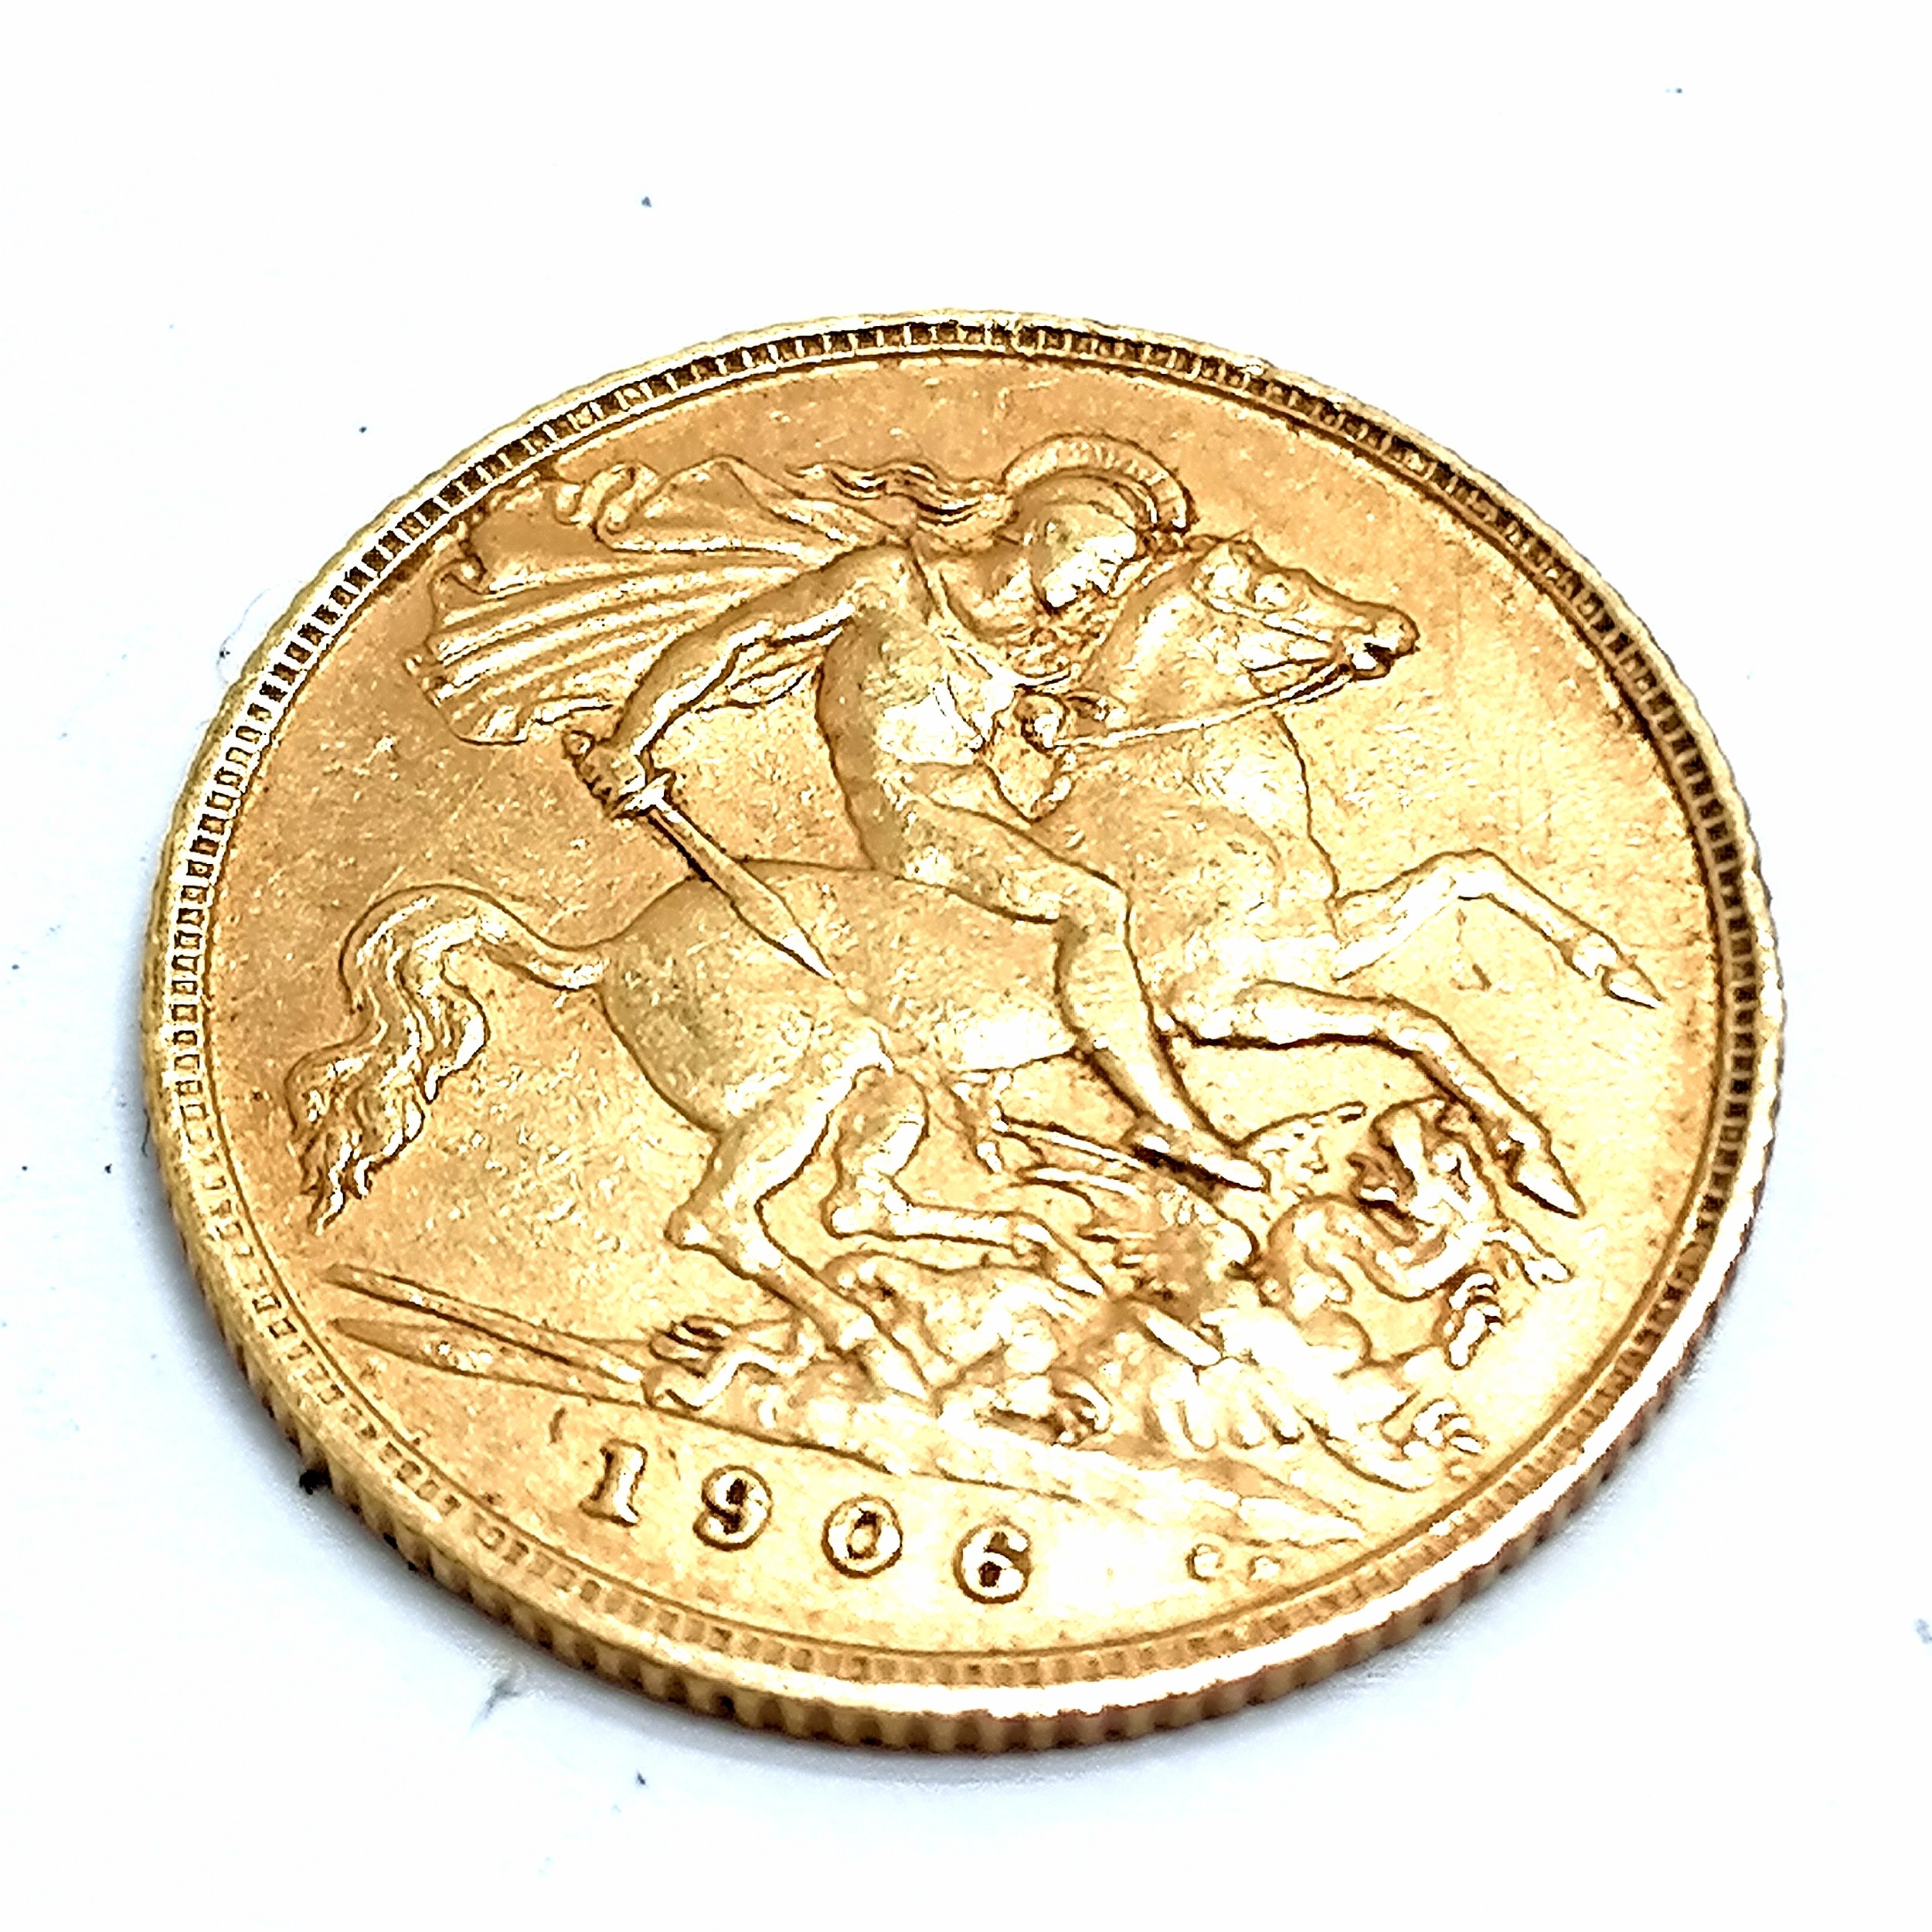 1906 KEVII half sovereign coin (3.98g) t/w metal sovereign coin case - SOLD ON BEHALF OF THE NEW - Image 3 of 4